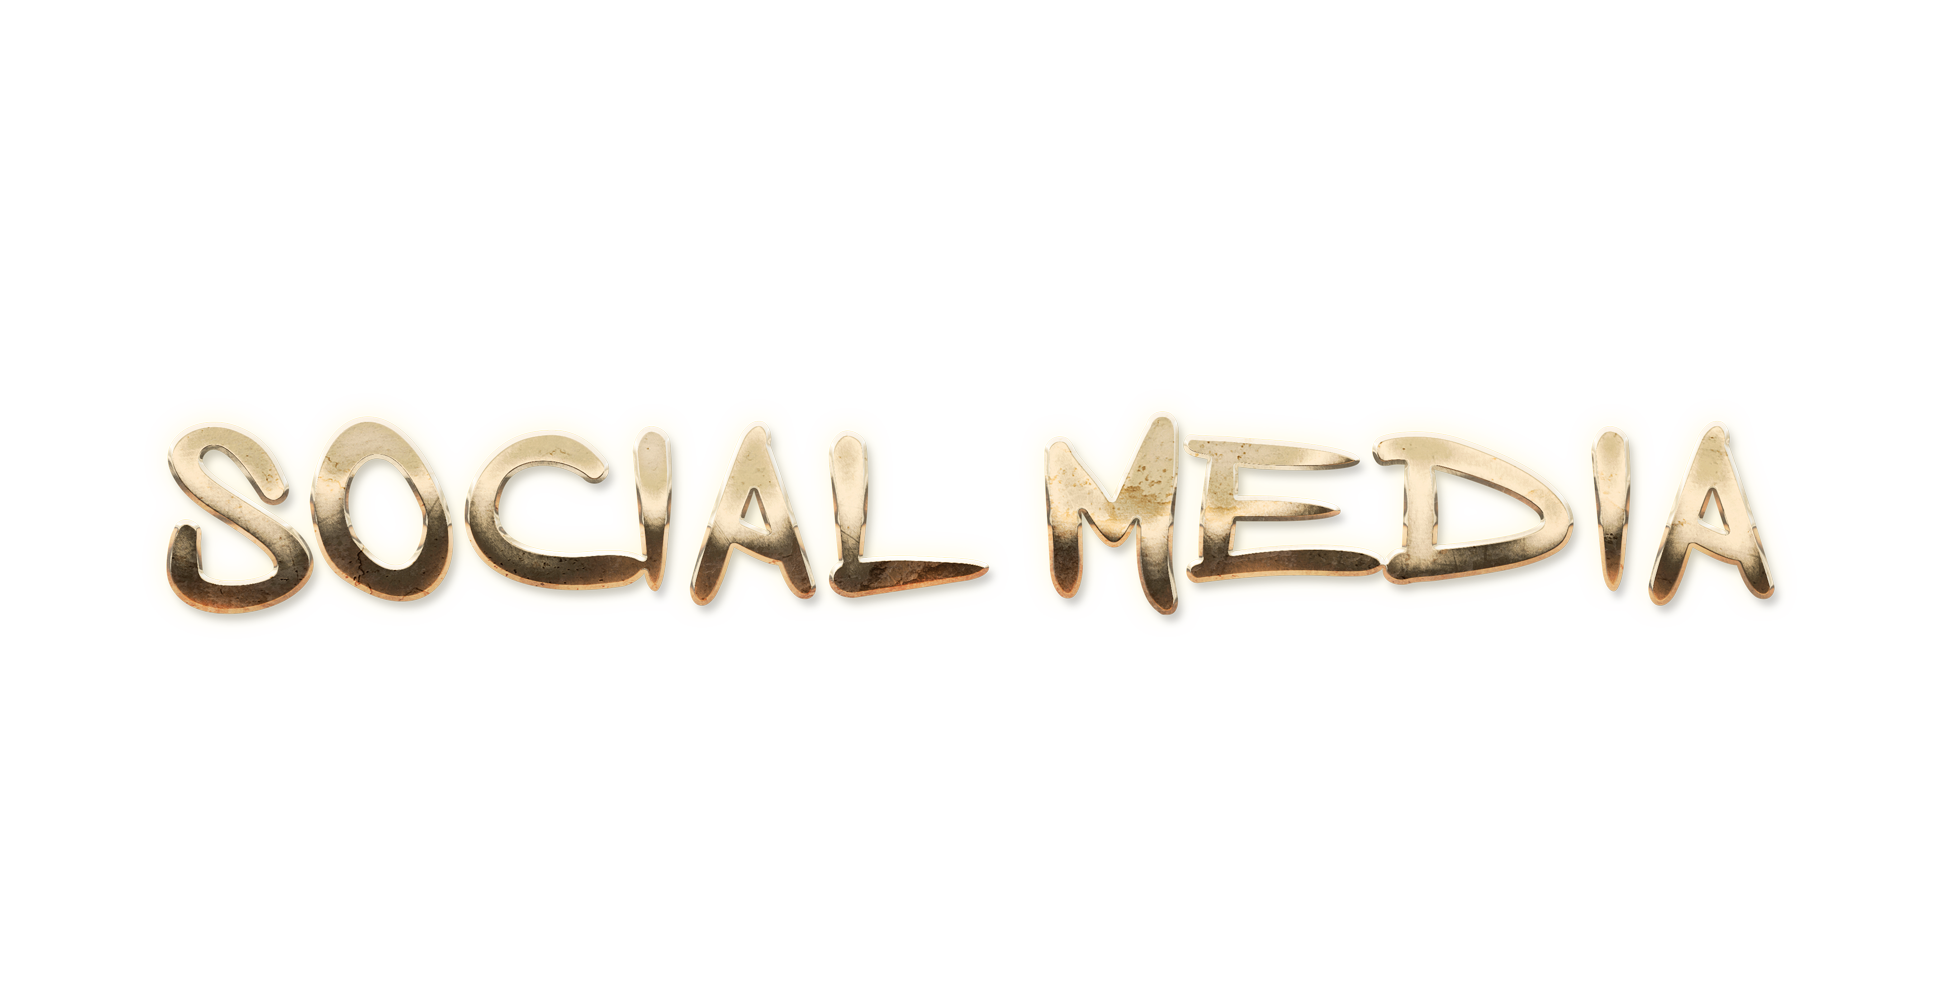 WORD SOCIAL MEDIA gold text effects art typography PNG images free